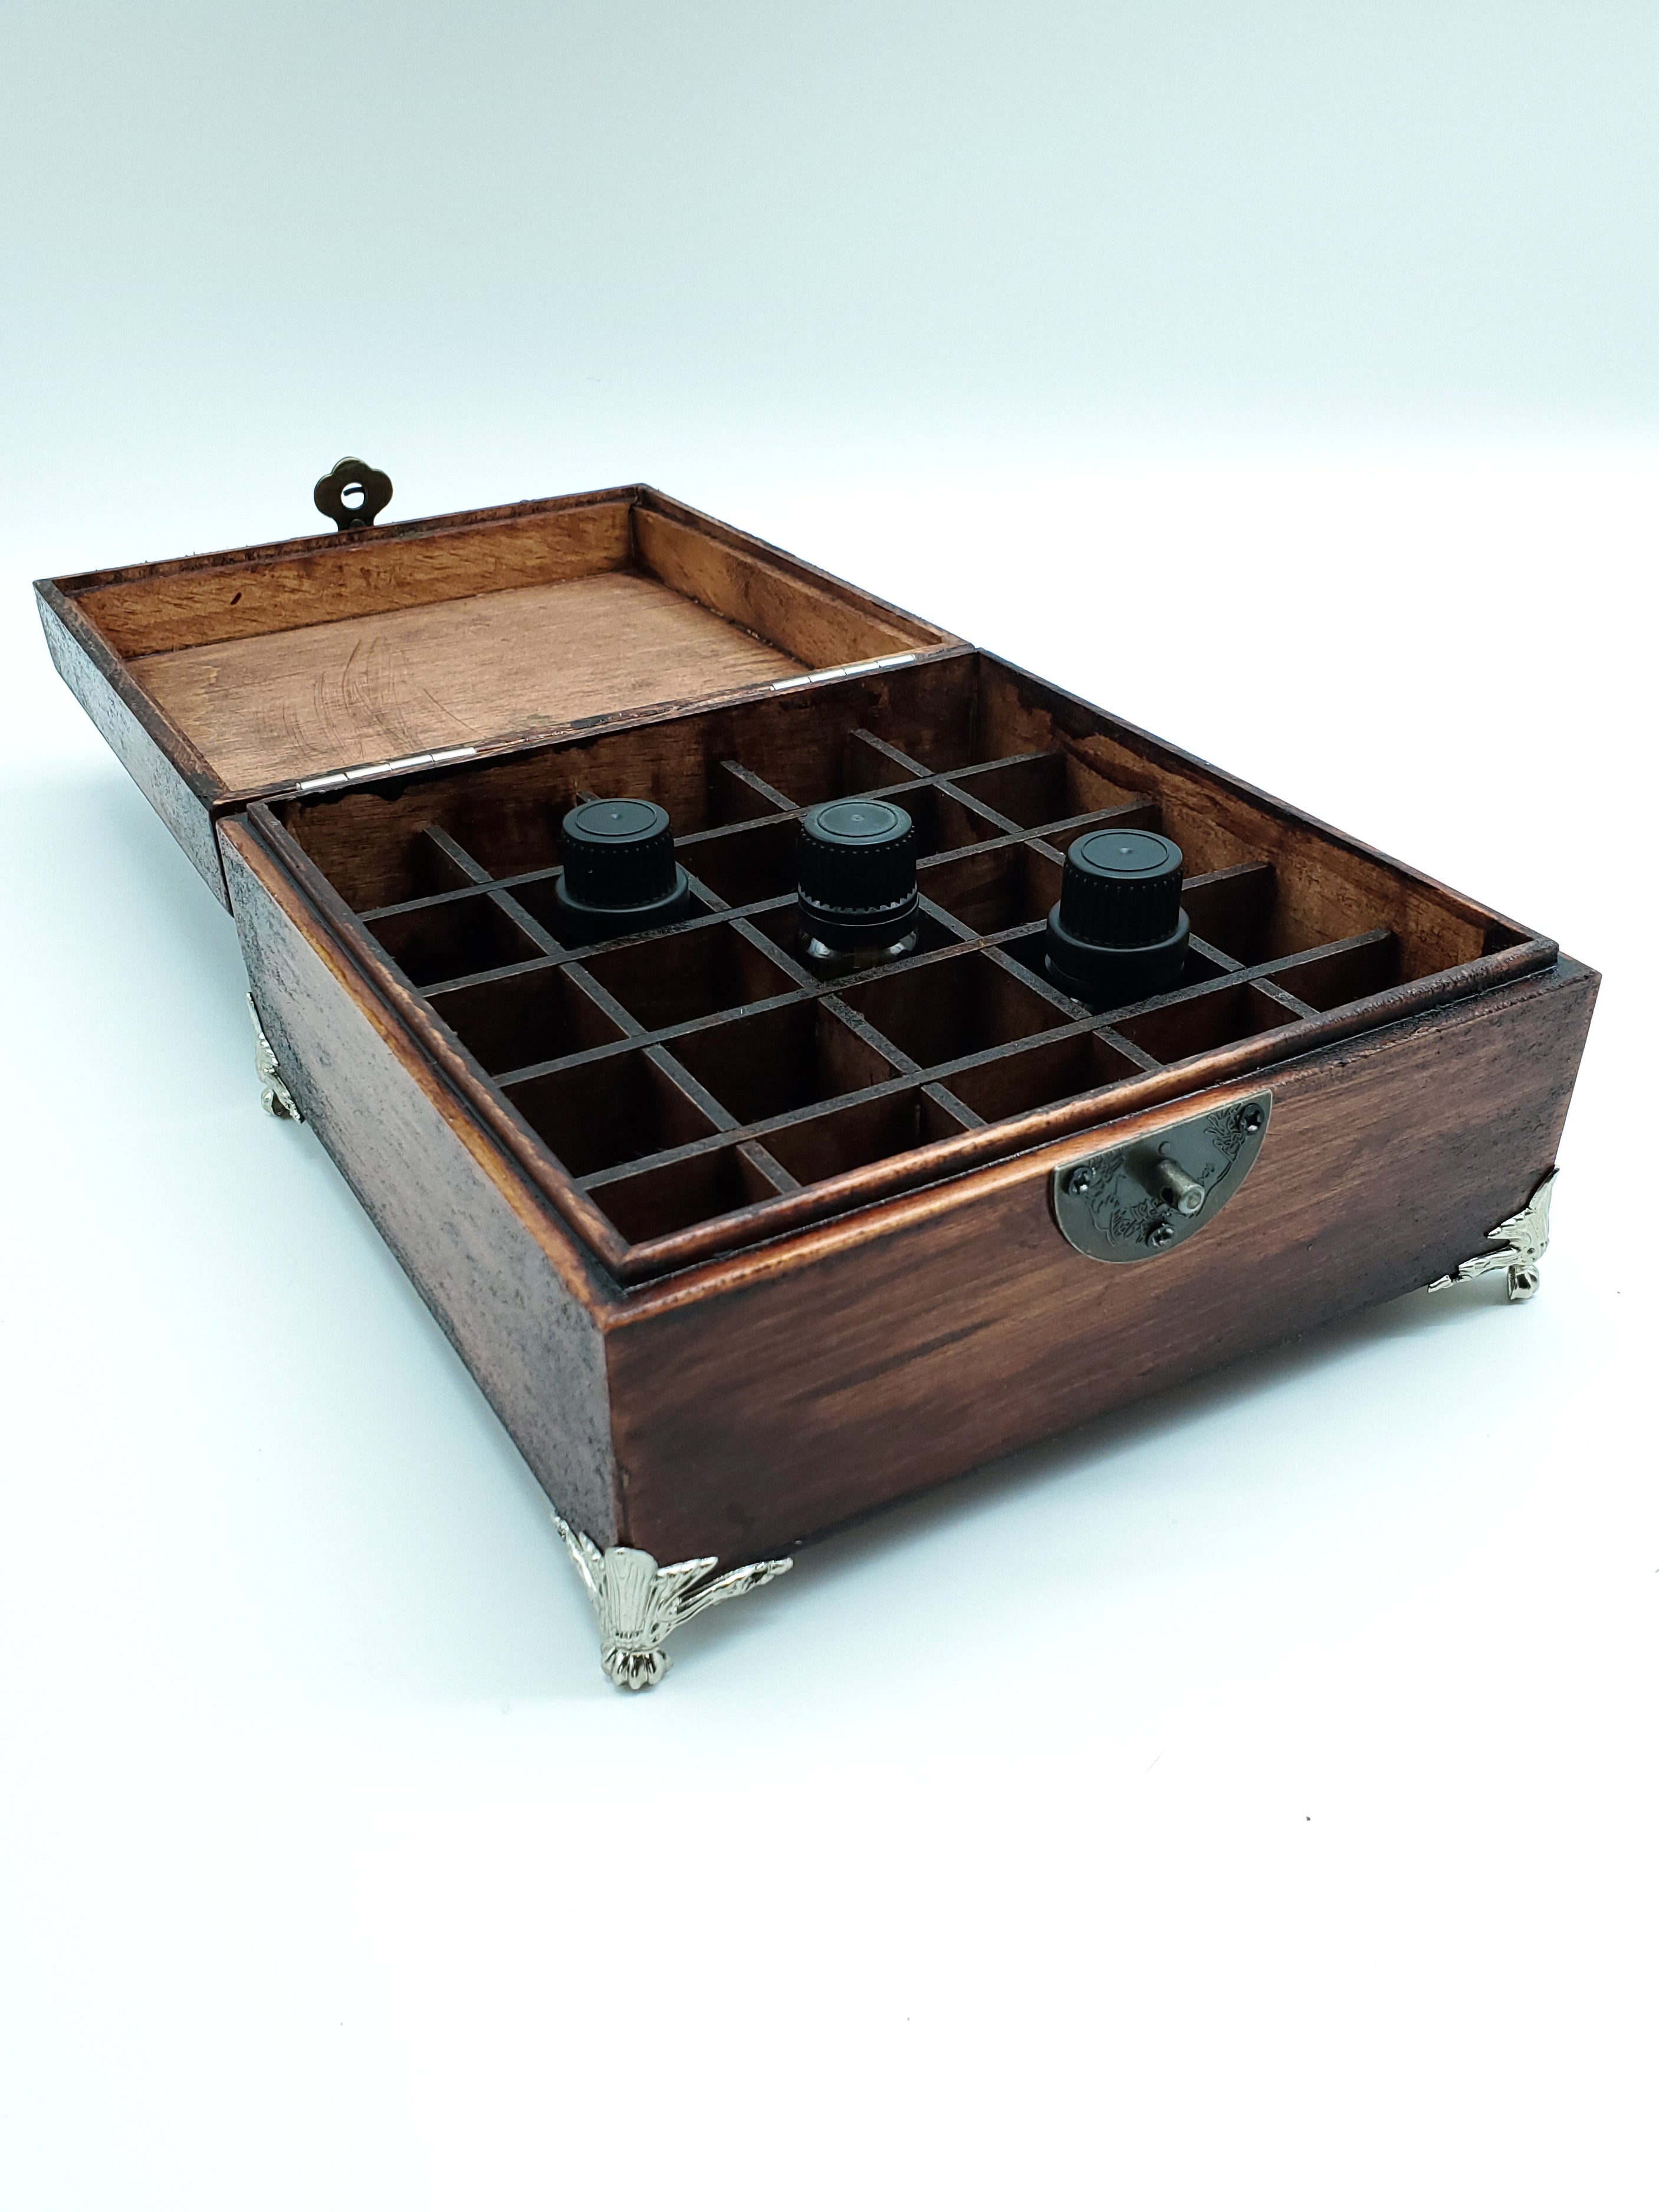 Moon Phase Divided Oils/Jewelry Box - The Caffeinated Raven